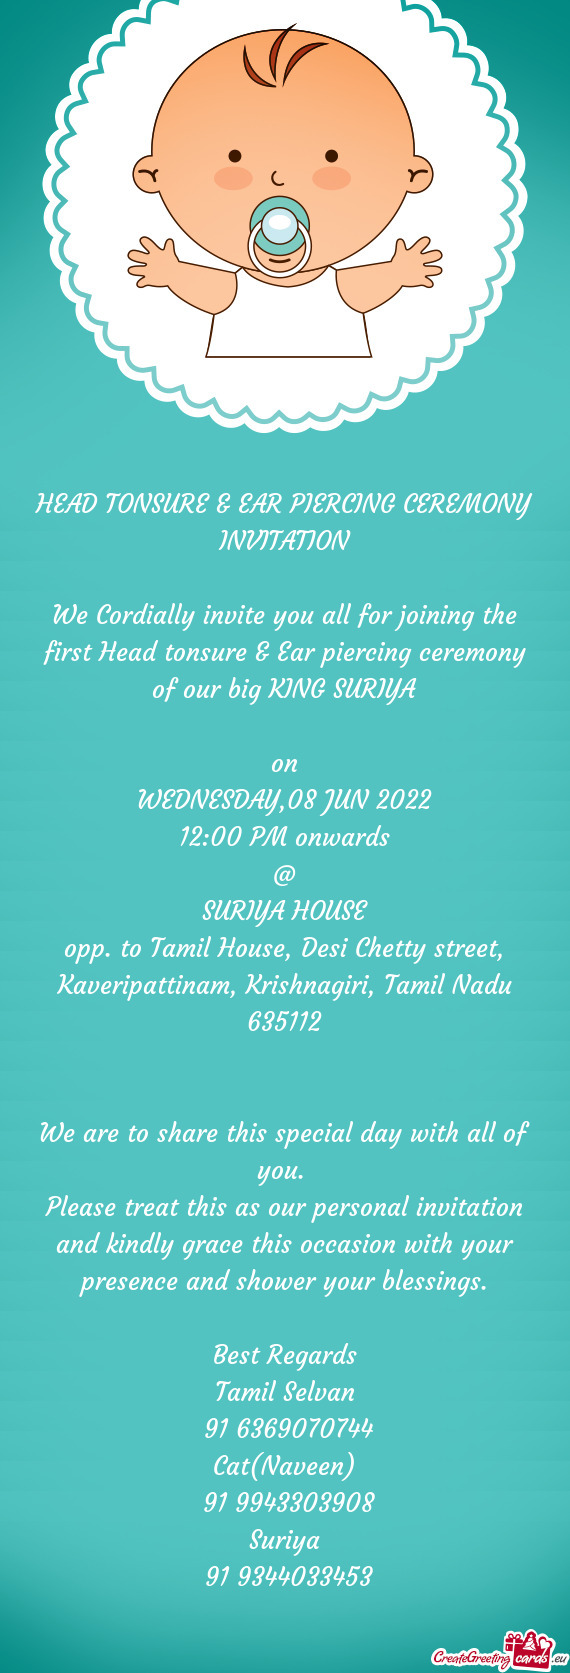 We Cordially invite you all for joining the first Head tonsure & Ear piercing ceremony of our big KI